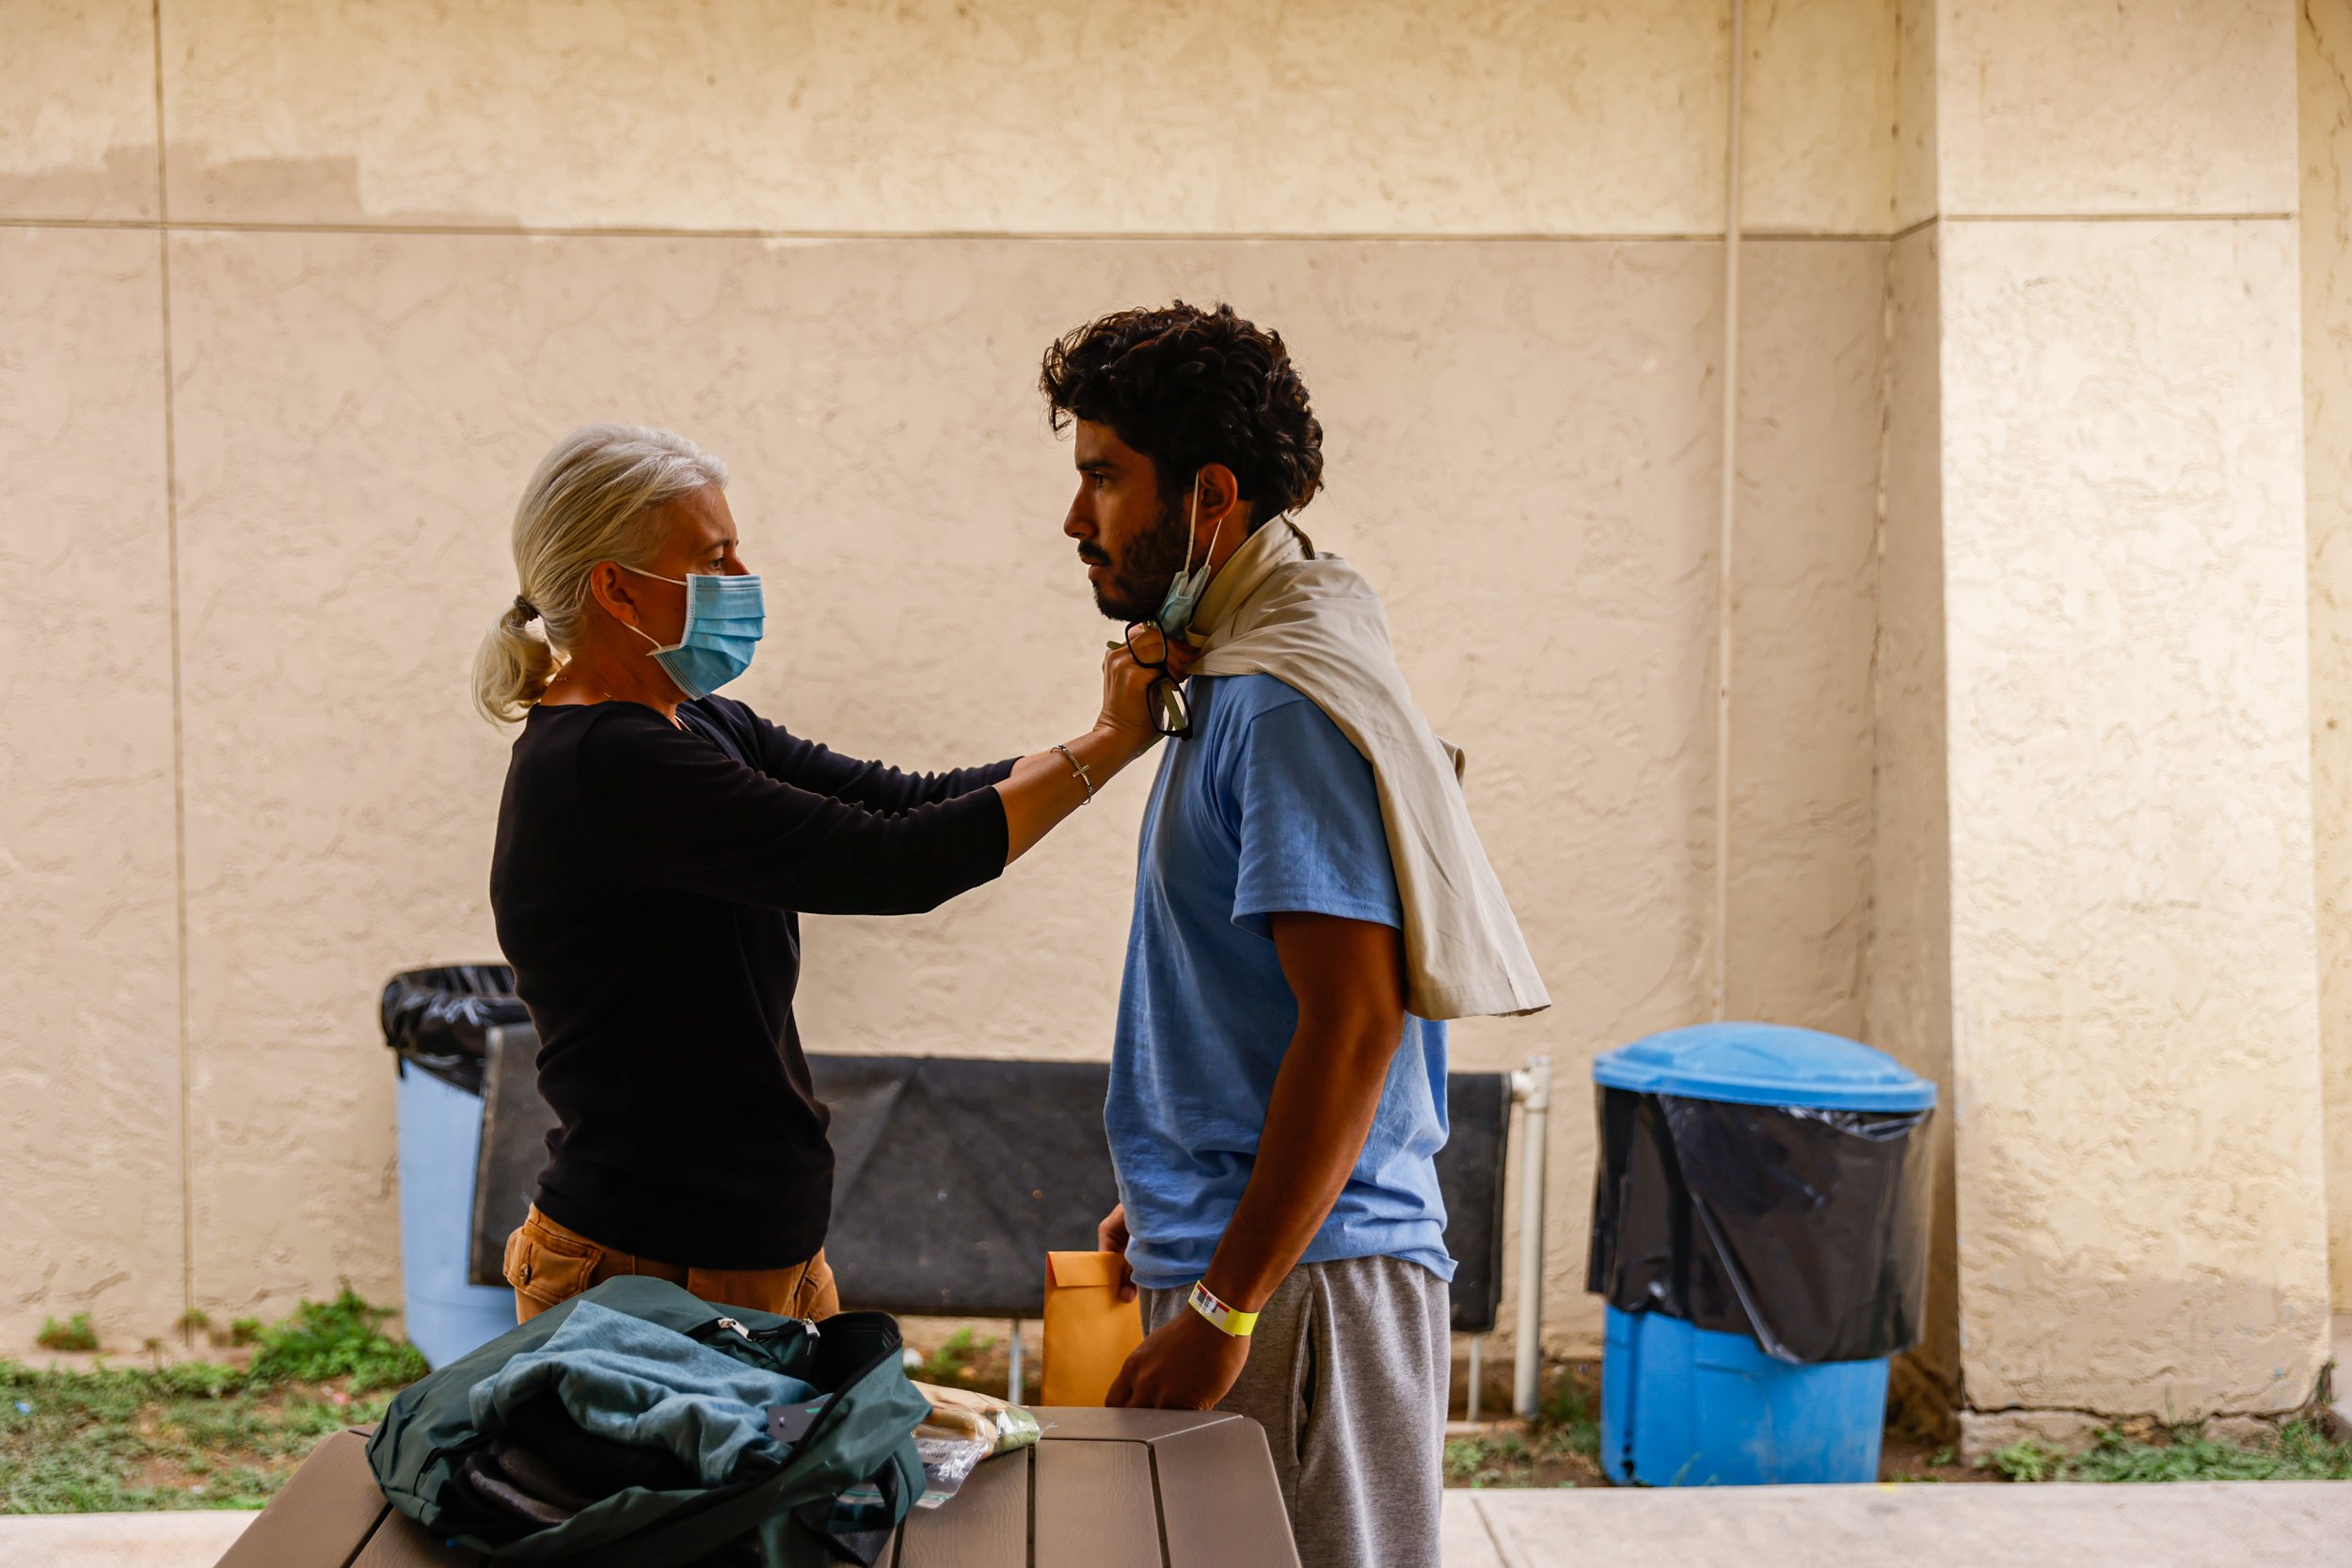  Tiffany Burrow, Director of Operations for the Val Verde Border Humanitarian Coalition, fits Víctor Rodríguez, 26, into shorts so he can have clean clothes before taking a bus to the East Coast in Del Rio on April 20, 2022. Rodríguez, originally fro